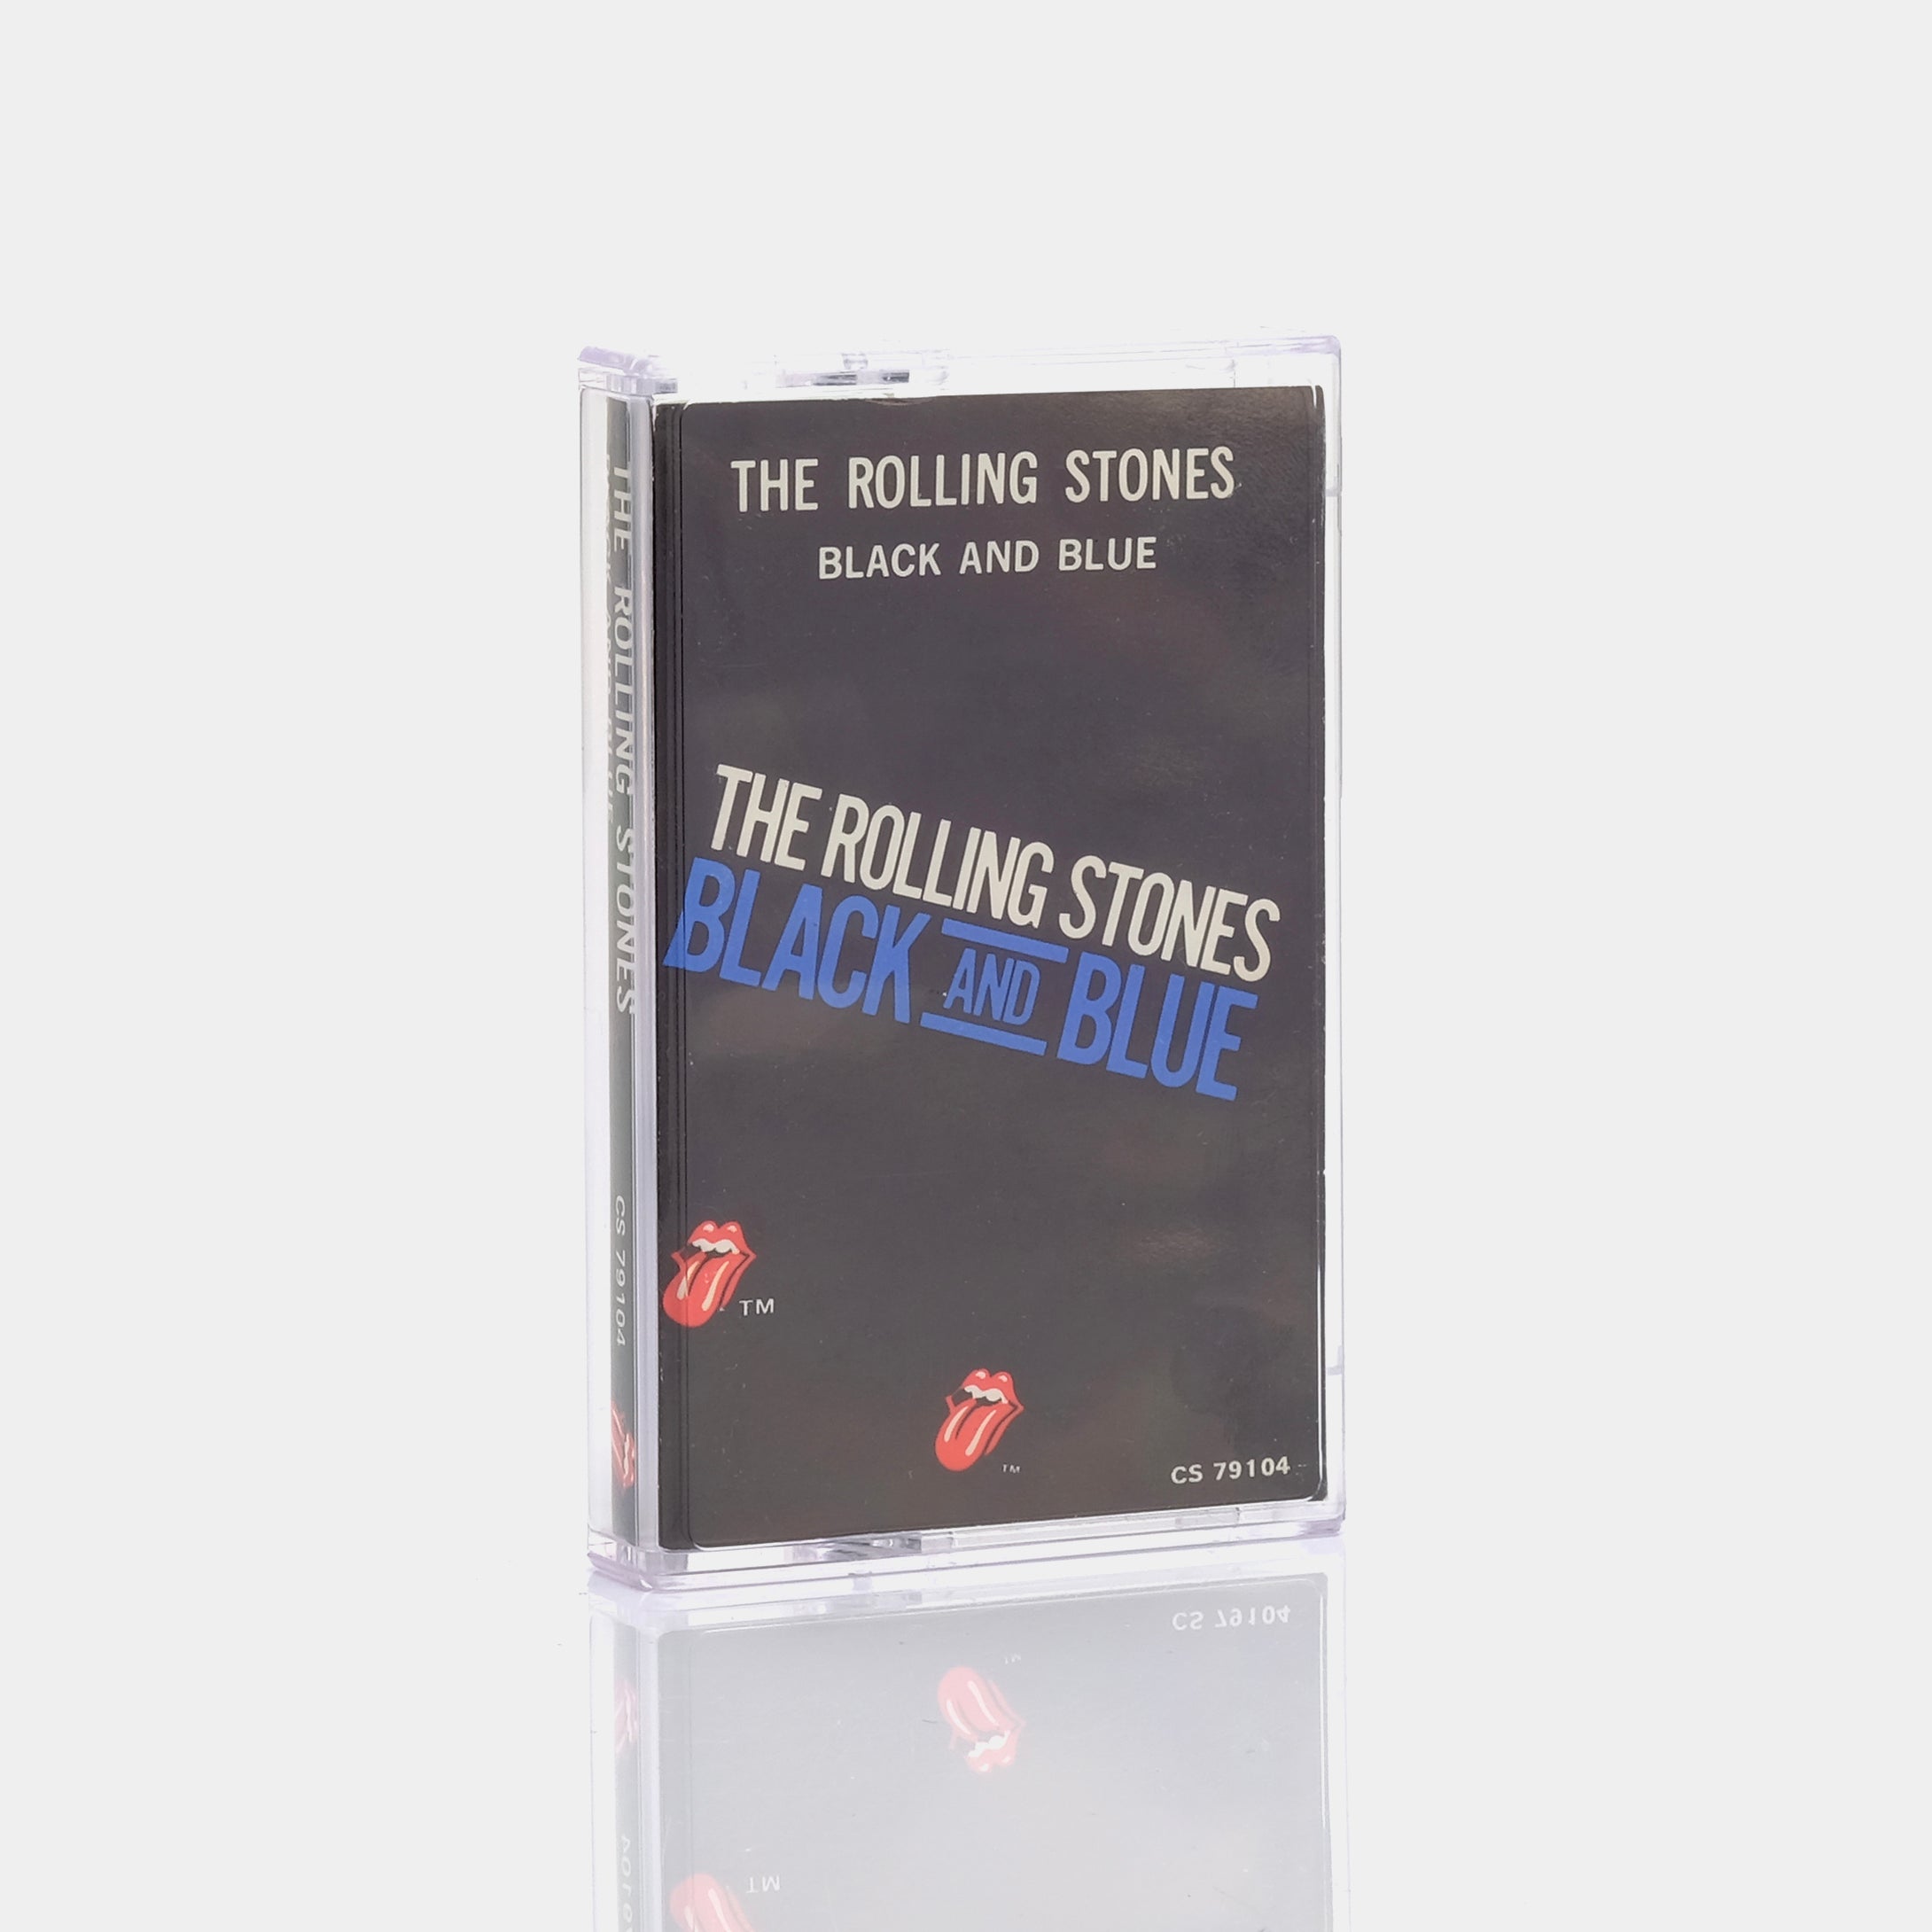 The Rolling Stones - Black and Blue Cassette Tape